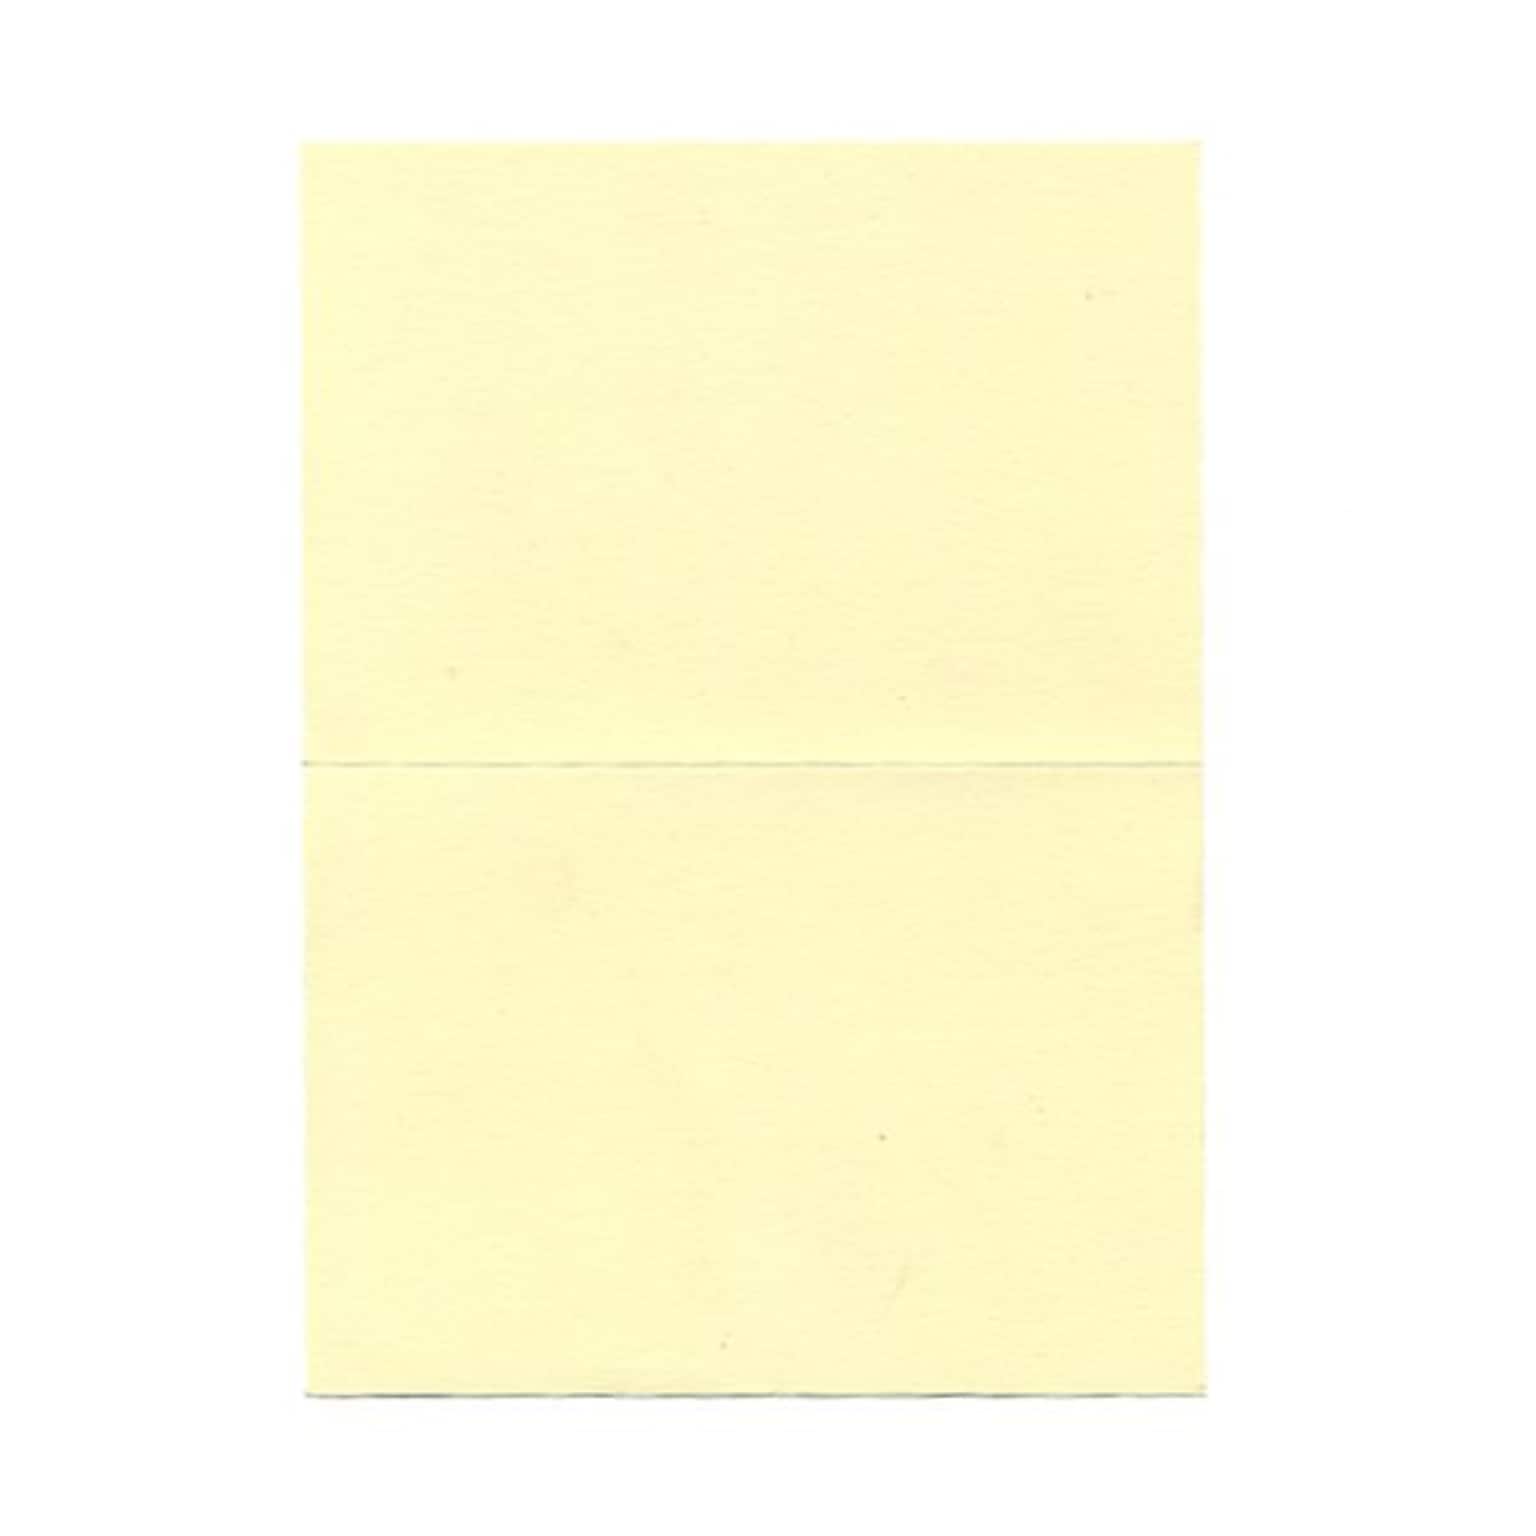 JAM Paper® Blank Foldover Cards, 4bar / A1 size, 3 1/2 x 4 7/8, Ivory Linen, 100/pack (309877)